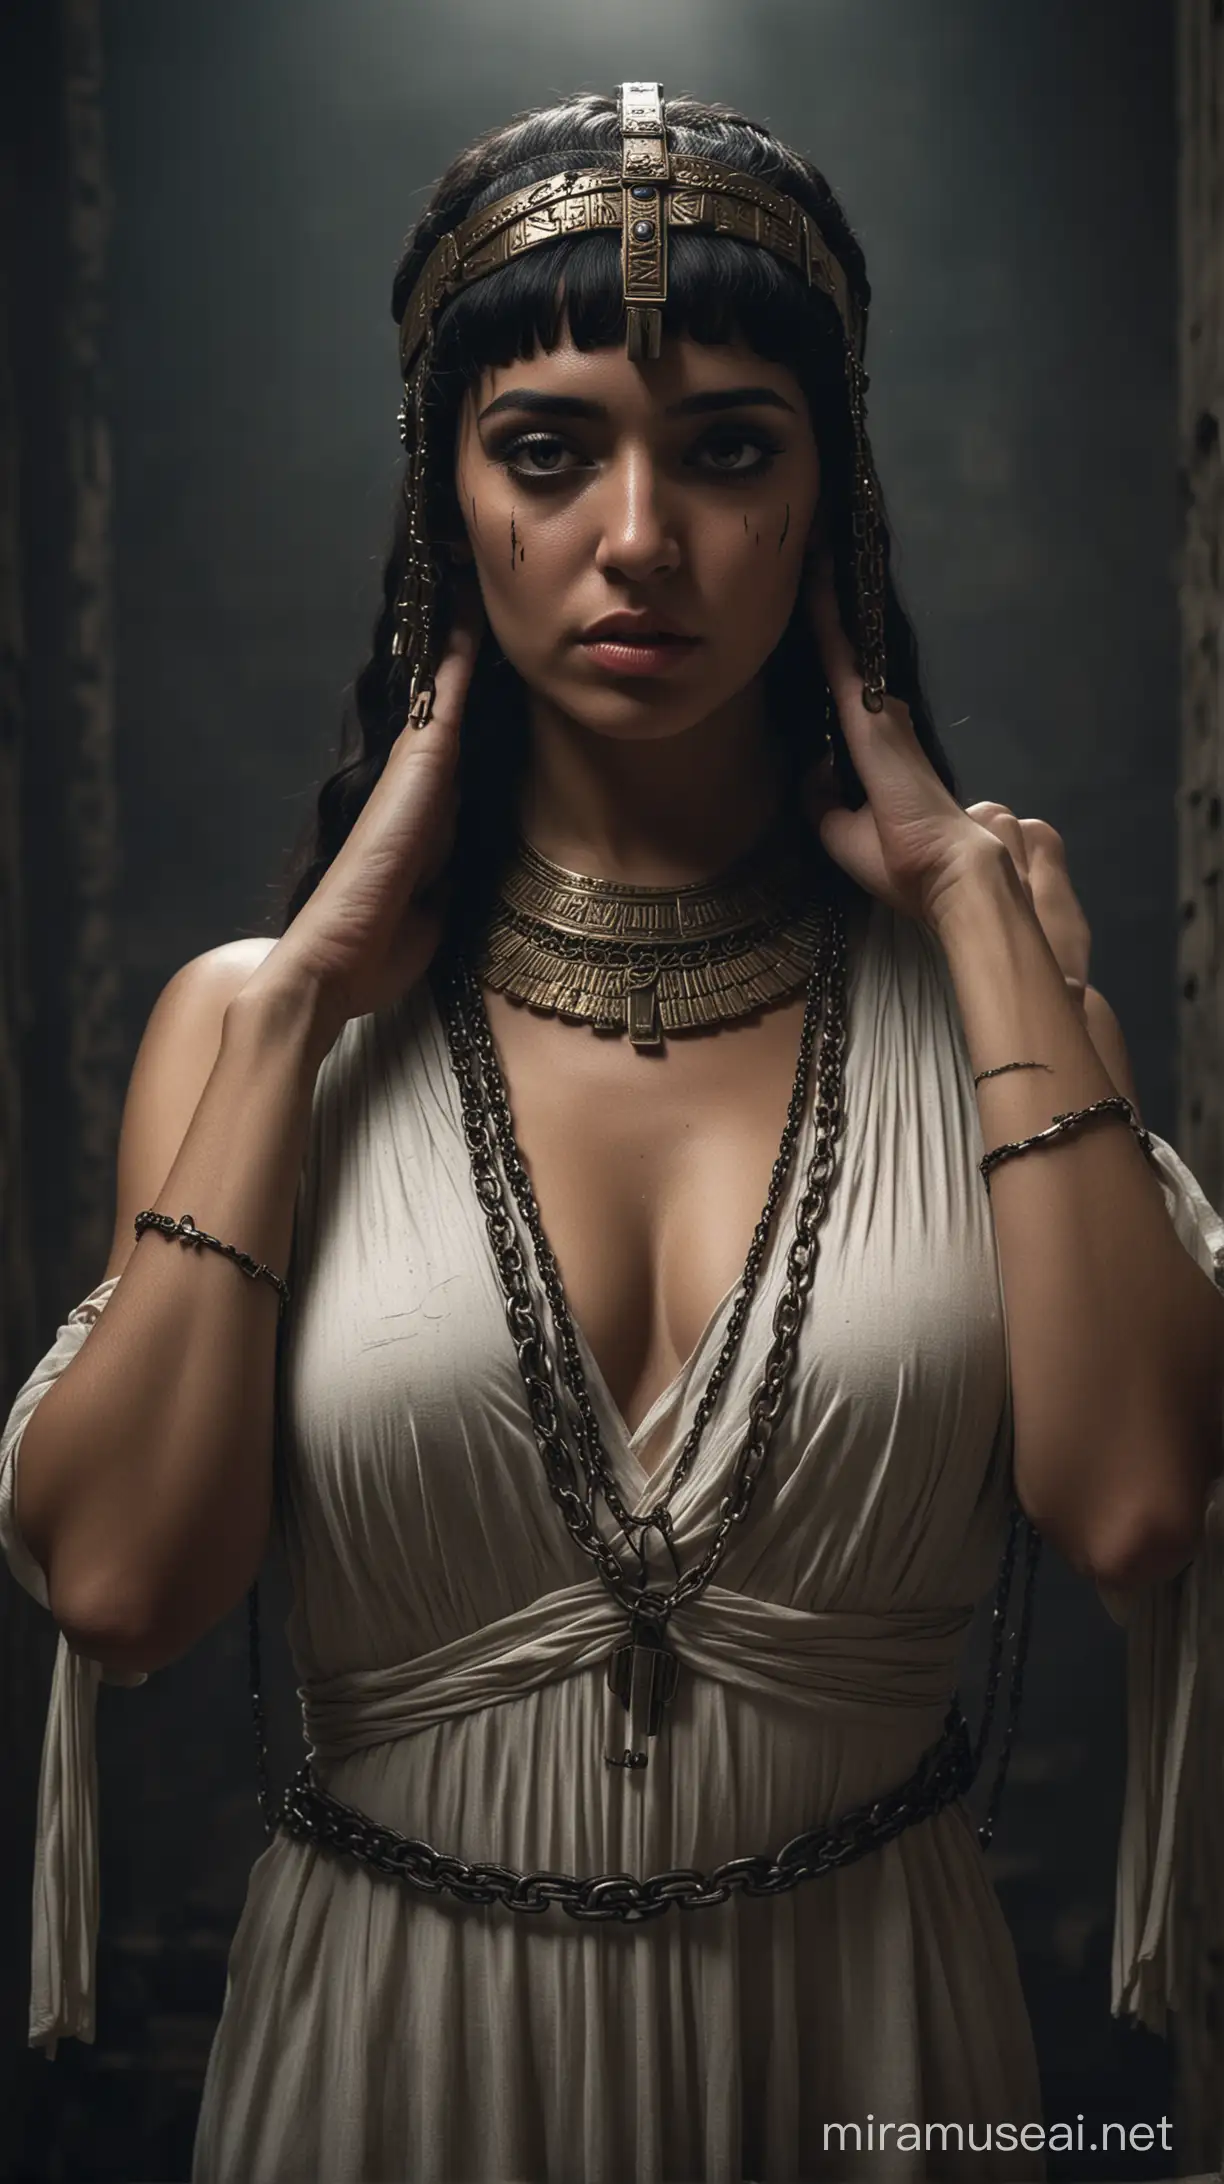 A (((Cleopatra))) in a (((moody setting))), locked with a chain around her head and hands, expressionlessly subdued amidst dim surroundings